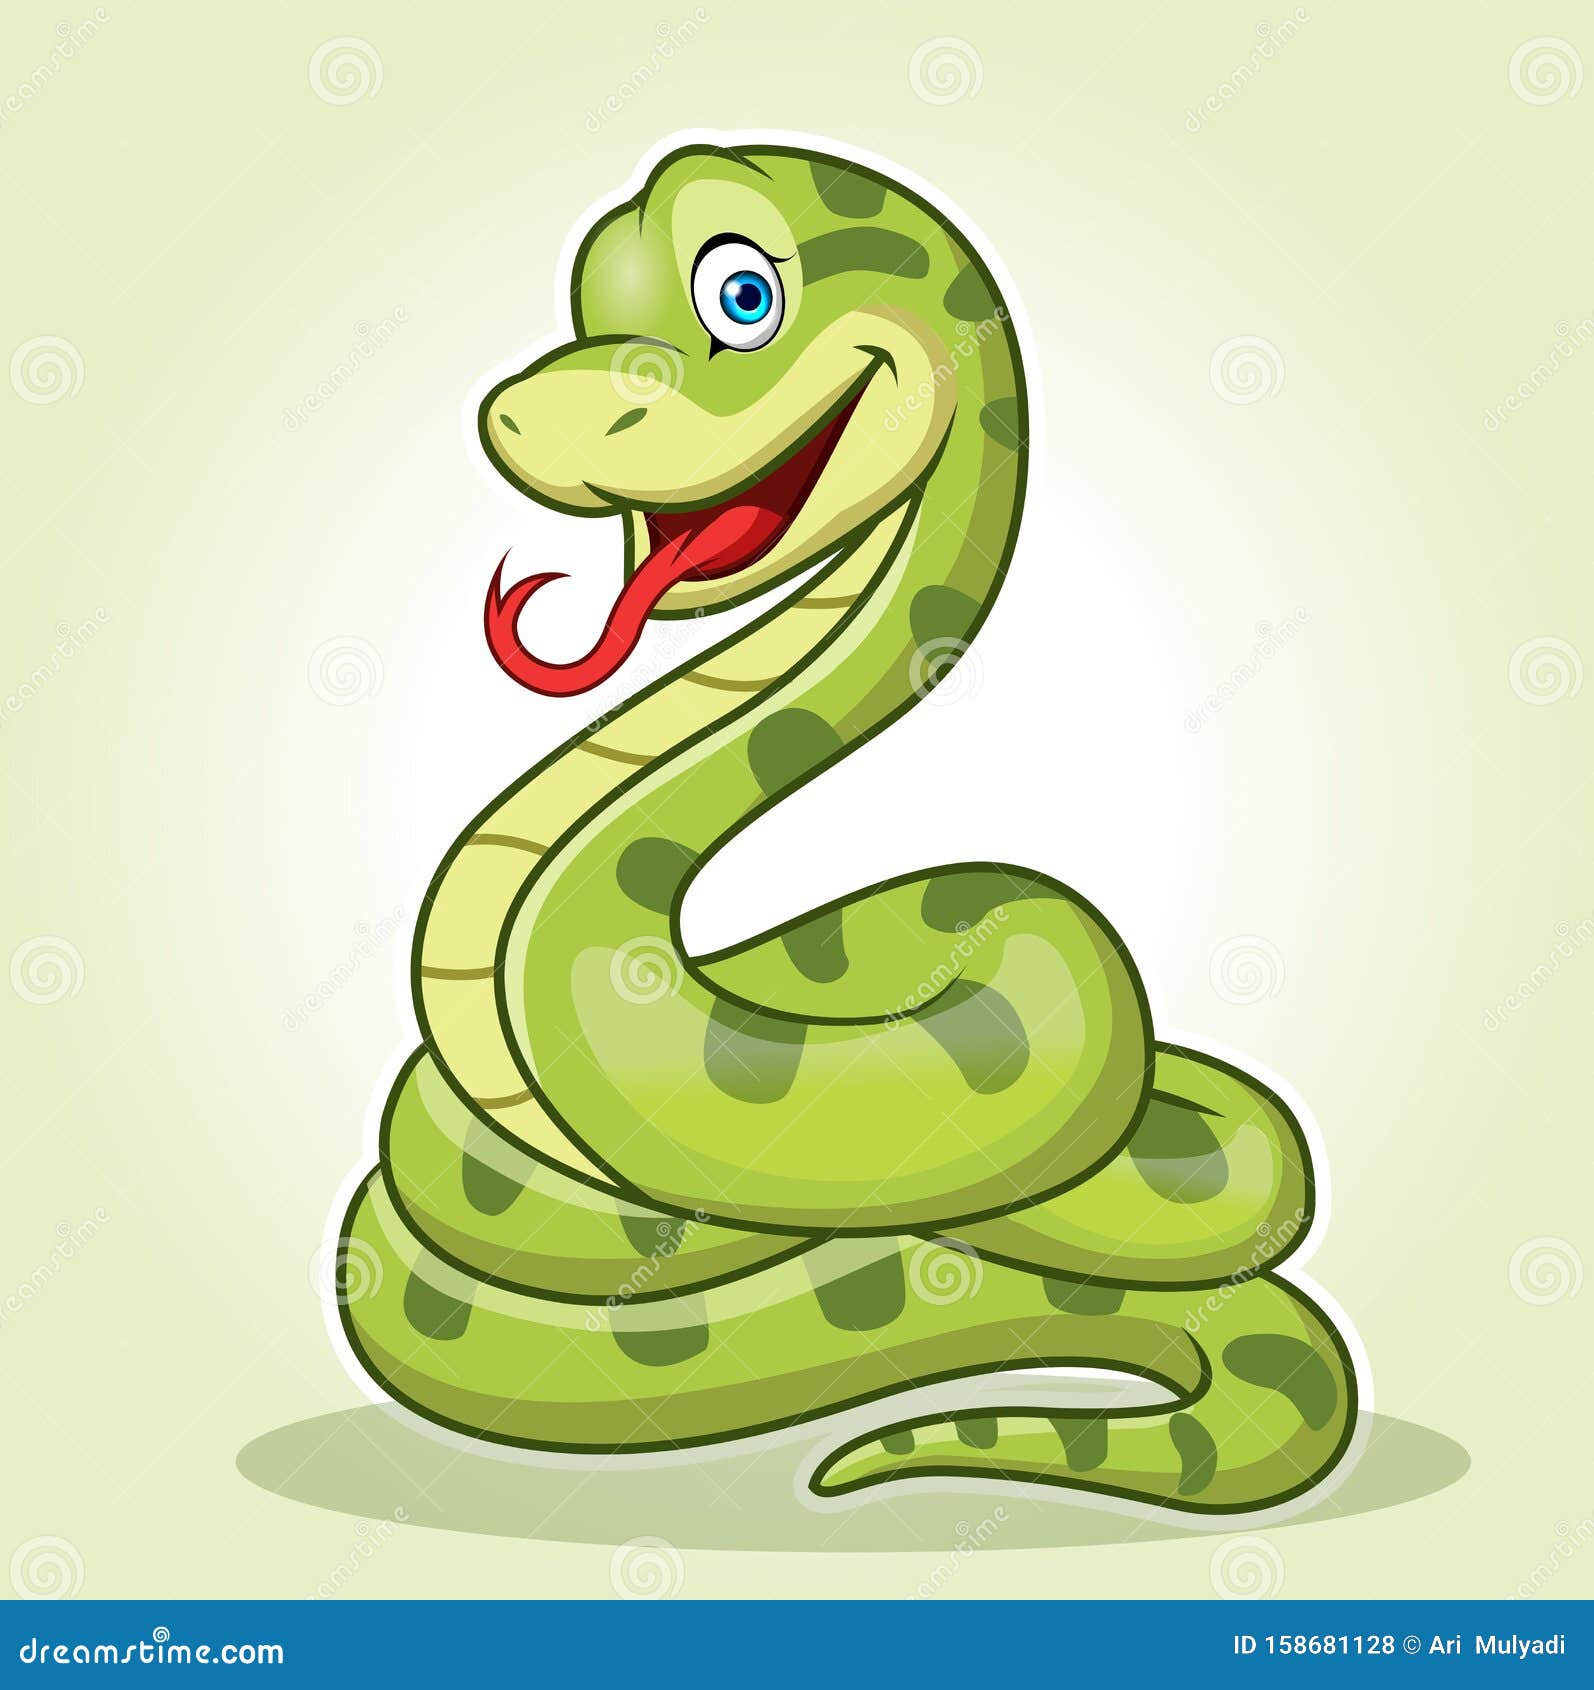 A Cute Anaconda Snake Cartoon, Circular Sitting or Standing while Smiling.  Stock Illustration - Illustration of drawing, rattle: 158681128